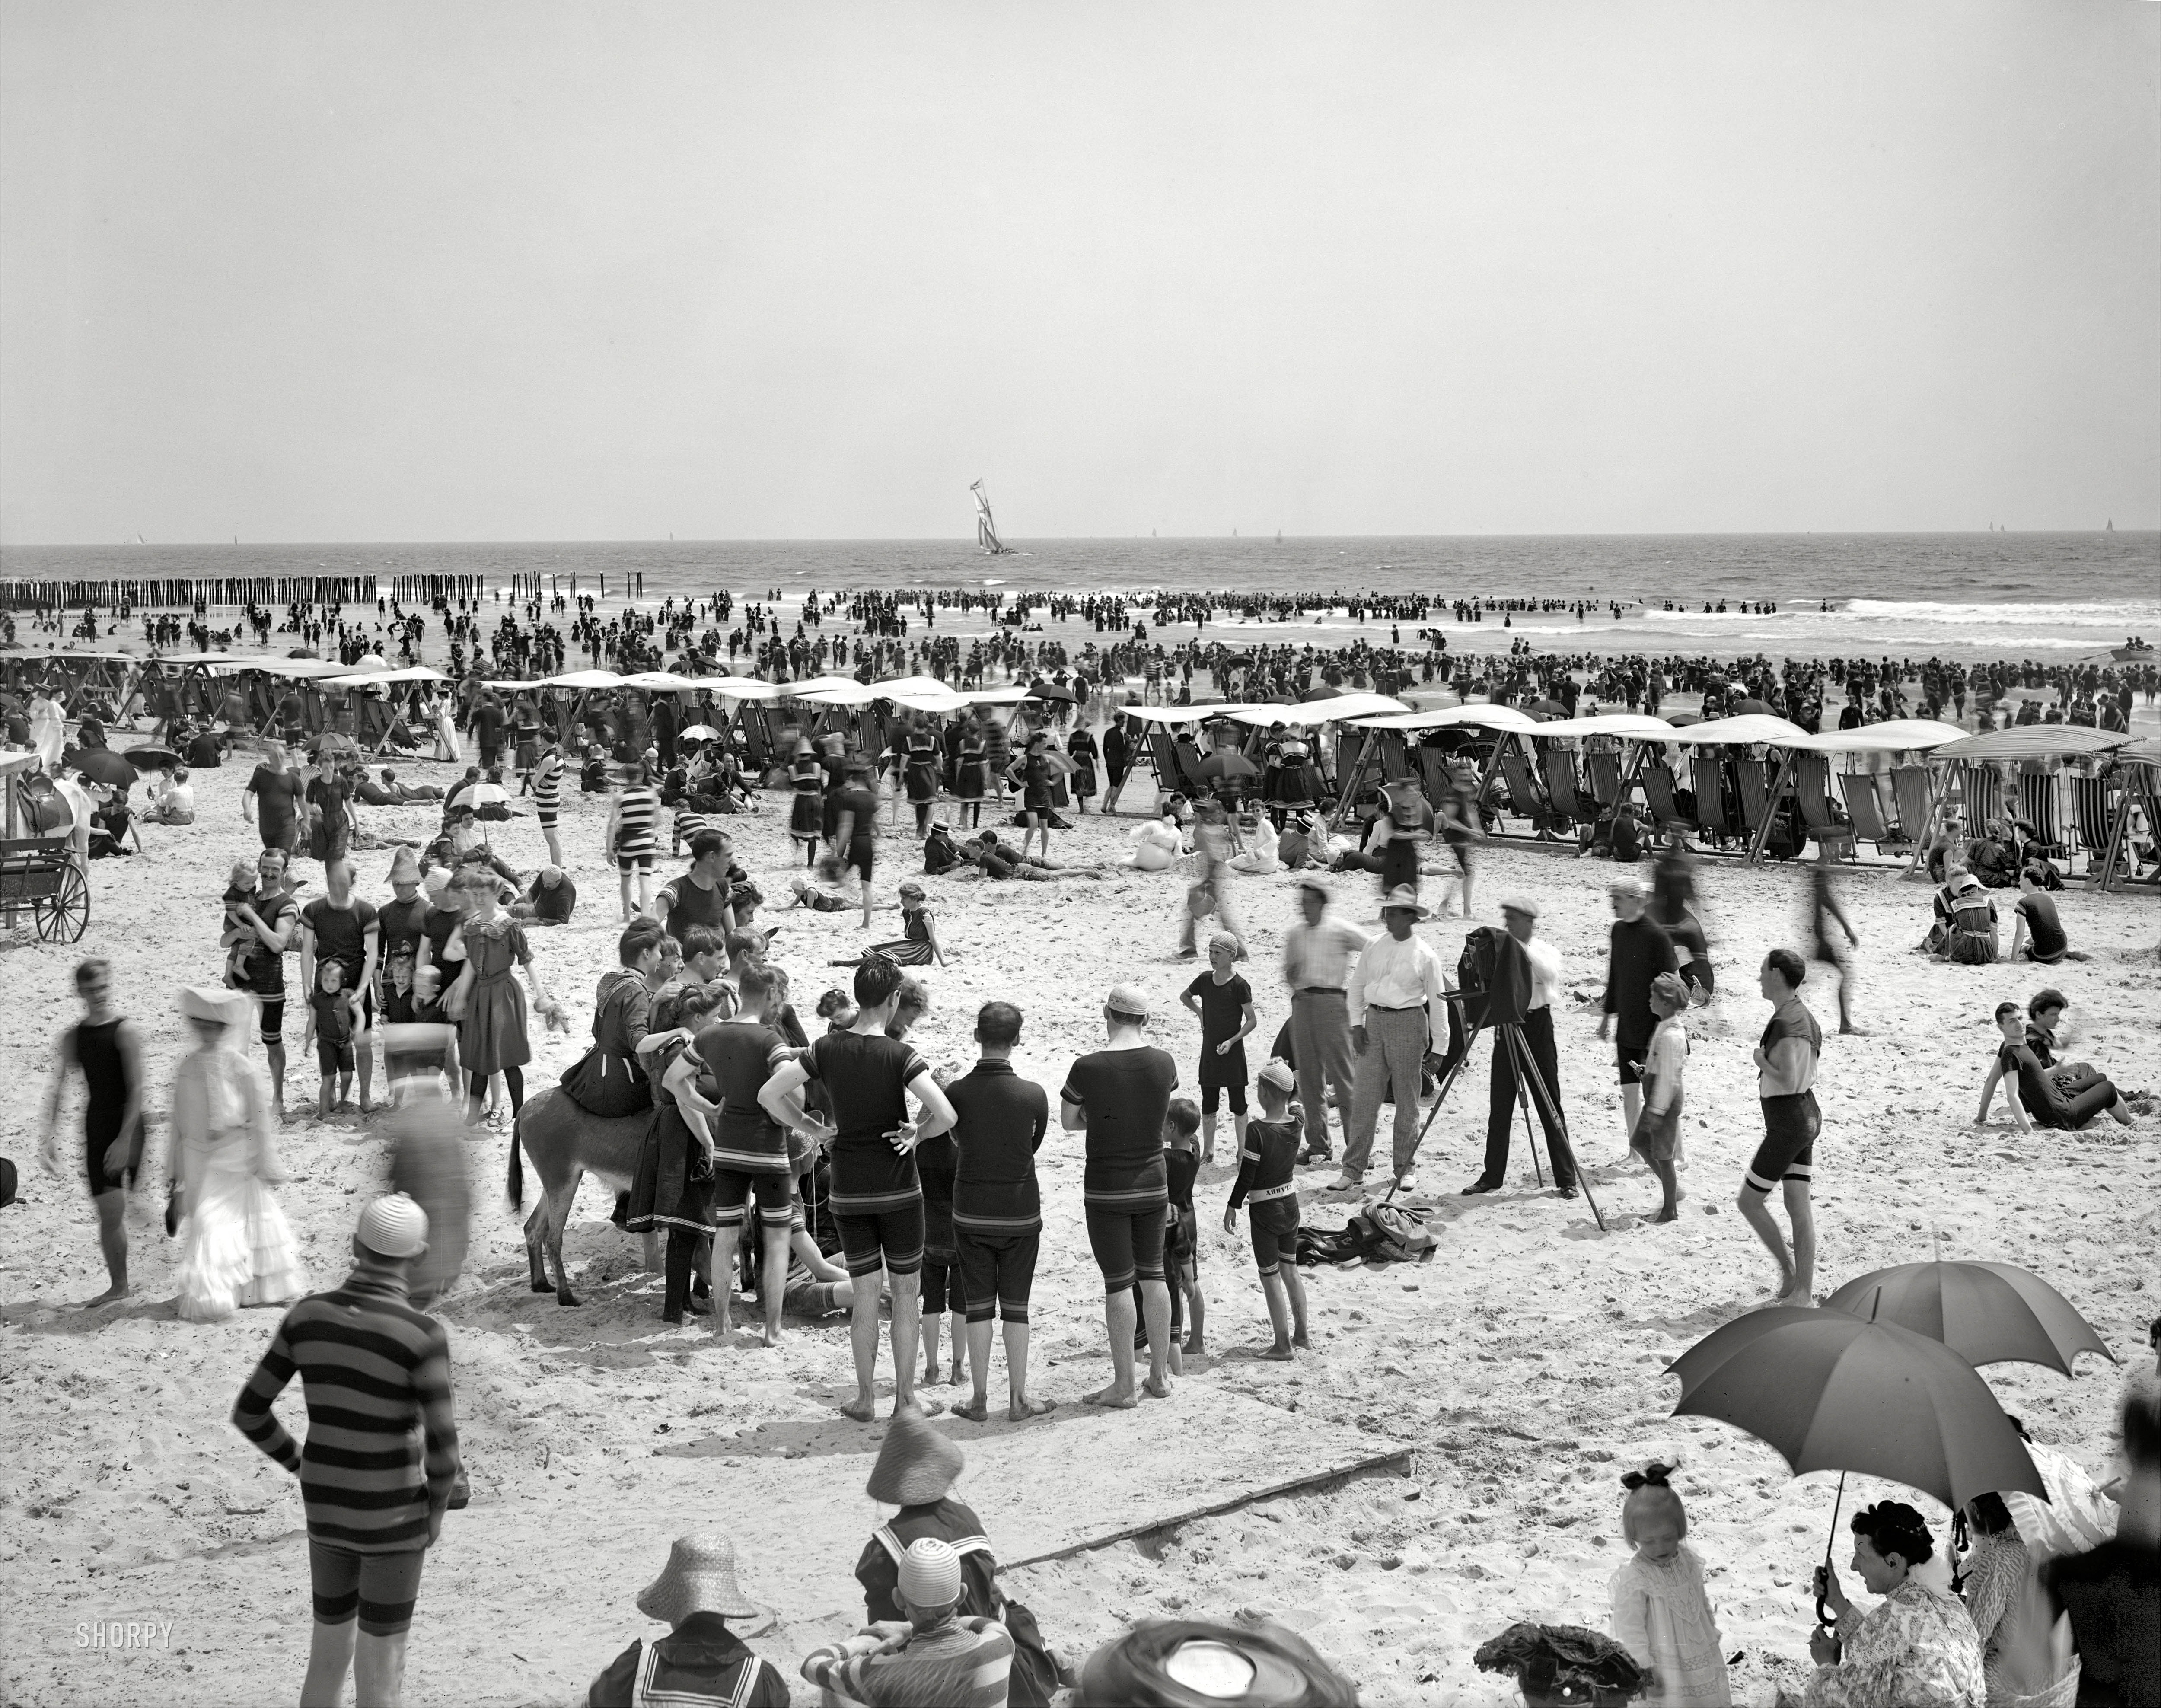 The Jersey Shore circa 1904. "The Beach at Atlantic City." One hundred seven years after this photograph was made, the people here are finally ready for their high-definition closeup. 8x10 inch dry plate glass negative. View full size.